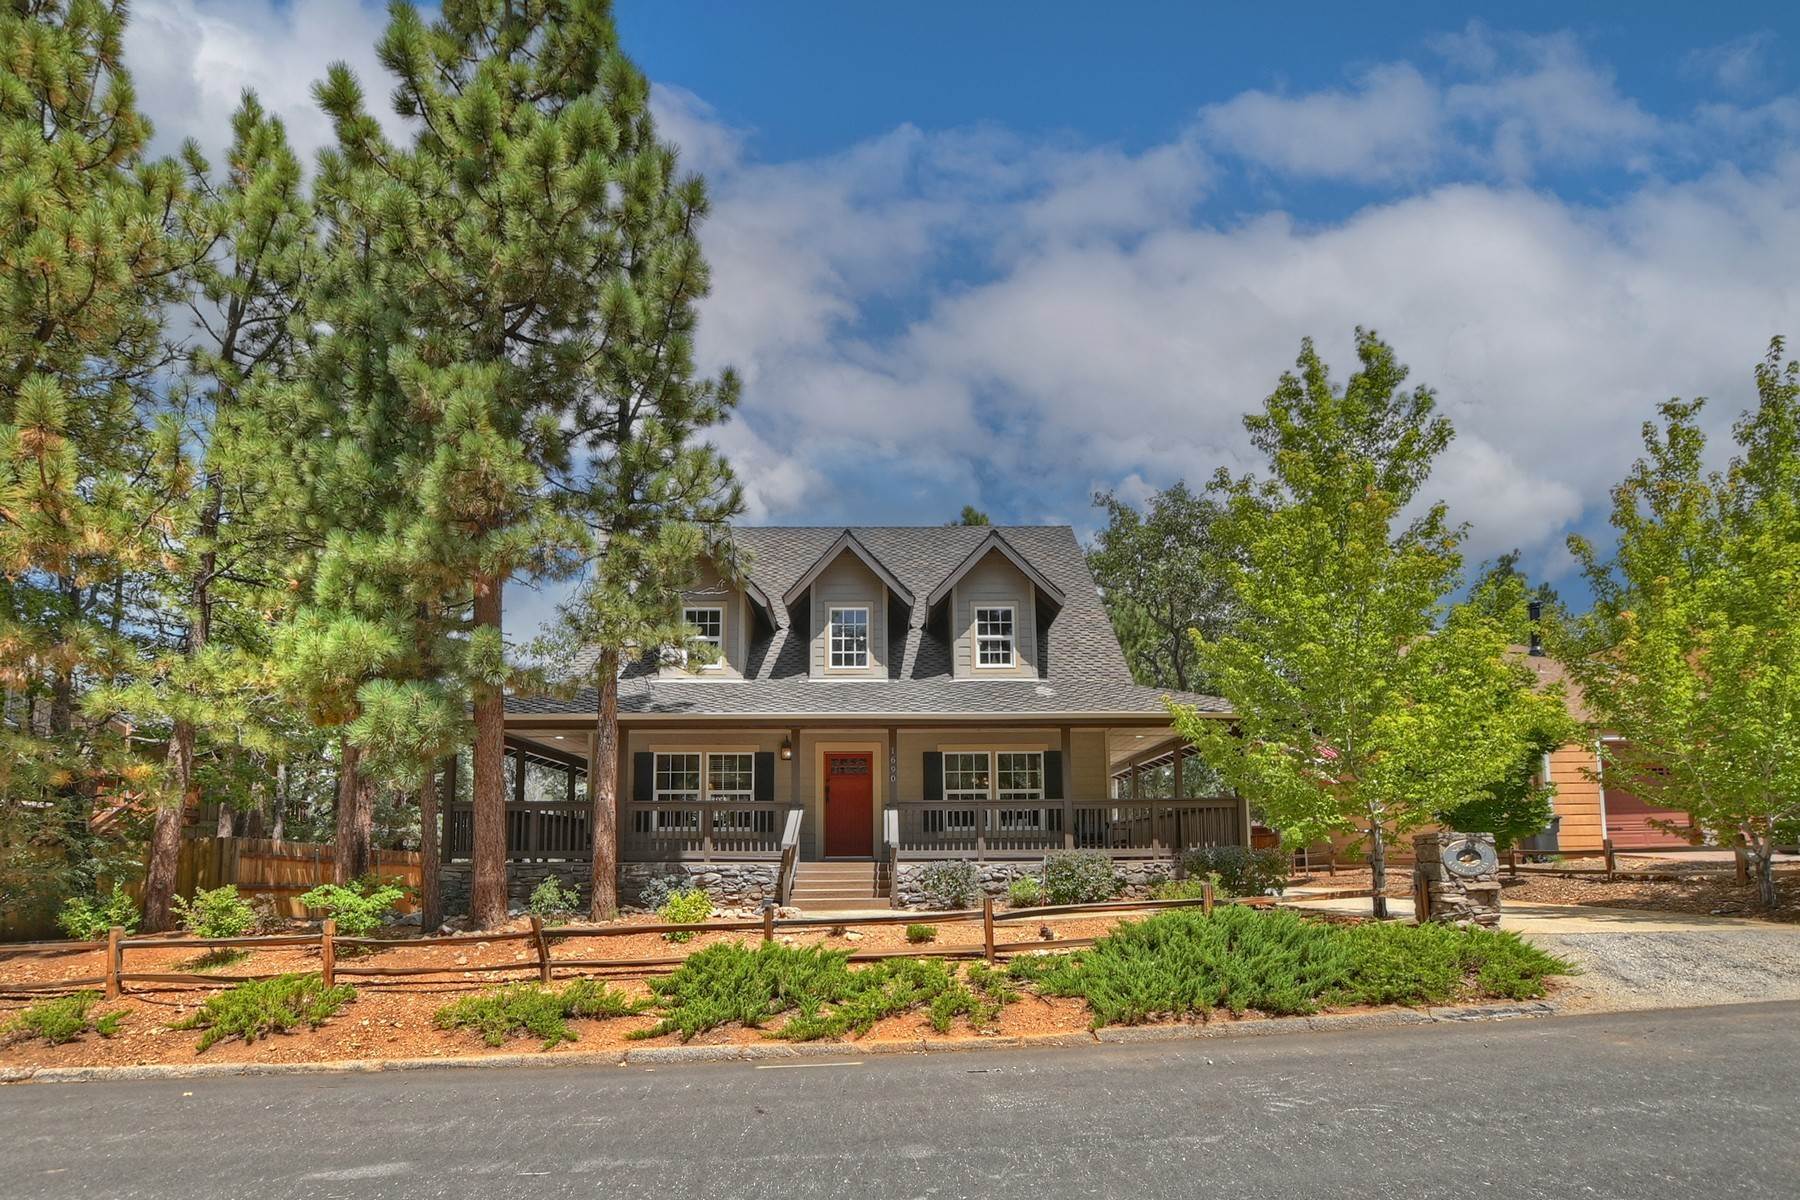 41. Single Family Homes for Sale at 1690 Cascade Road, Big Bear City, CA 92314 1690 Cascade Road Big Bear City, California 92314 United States